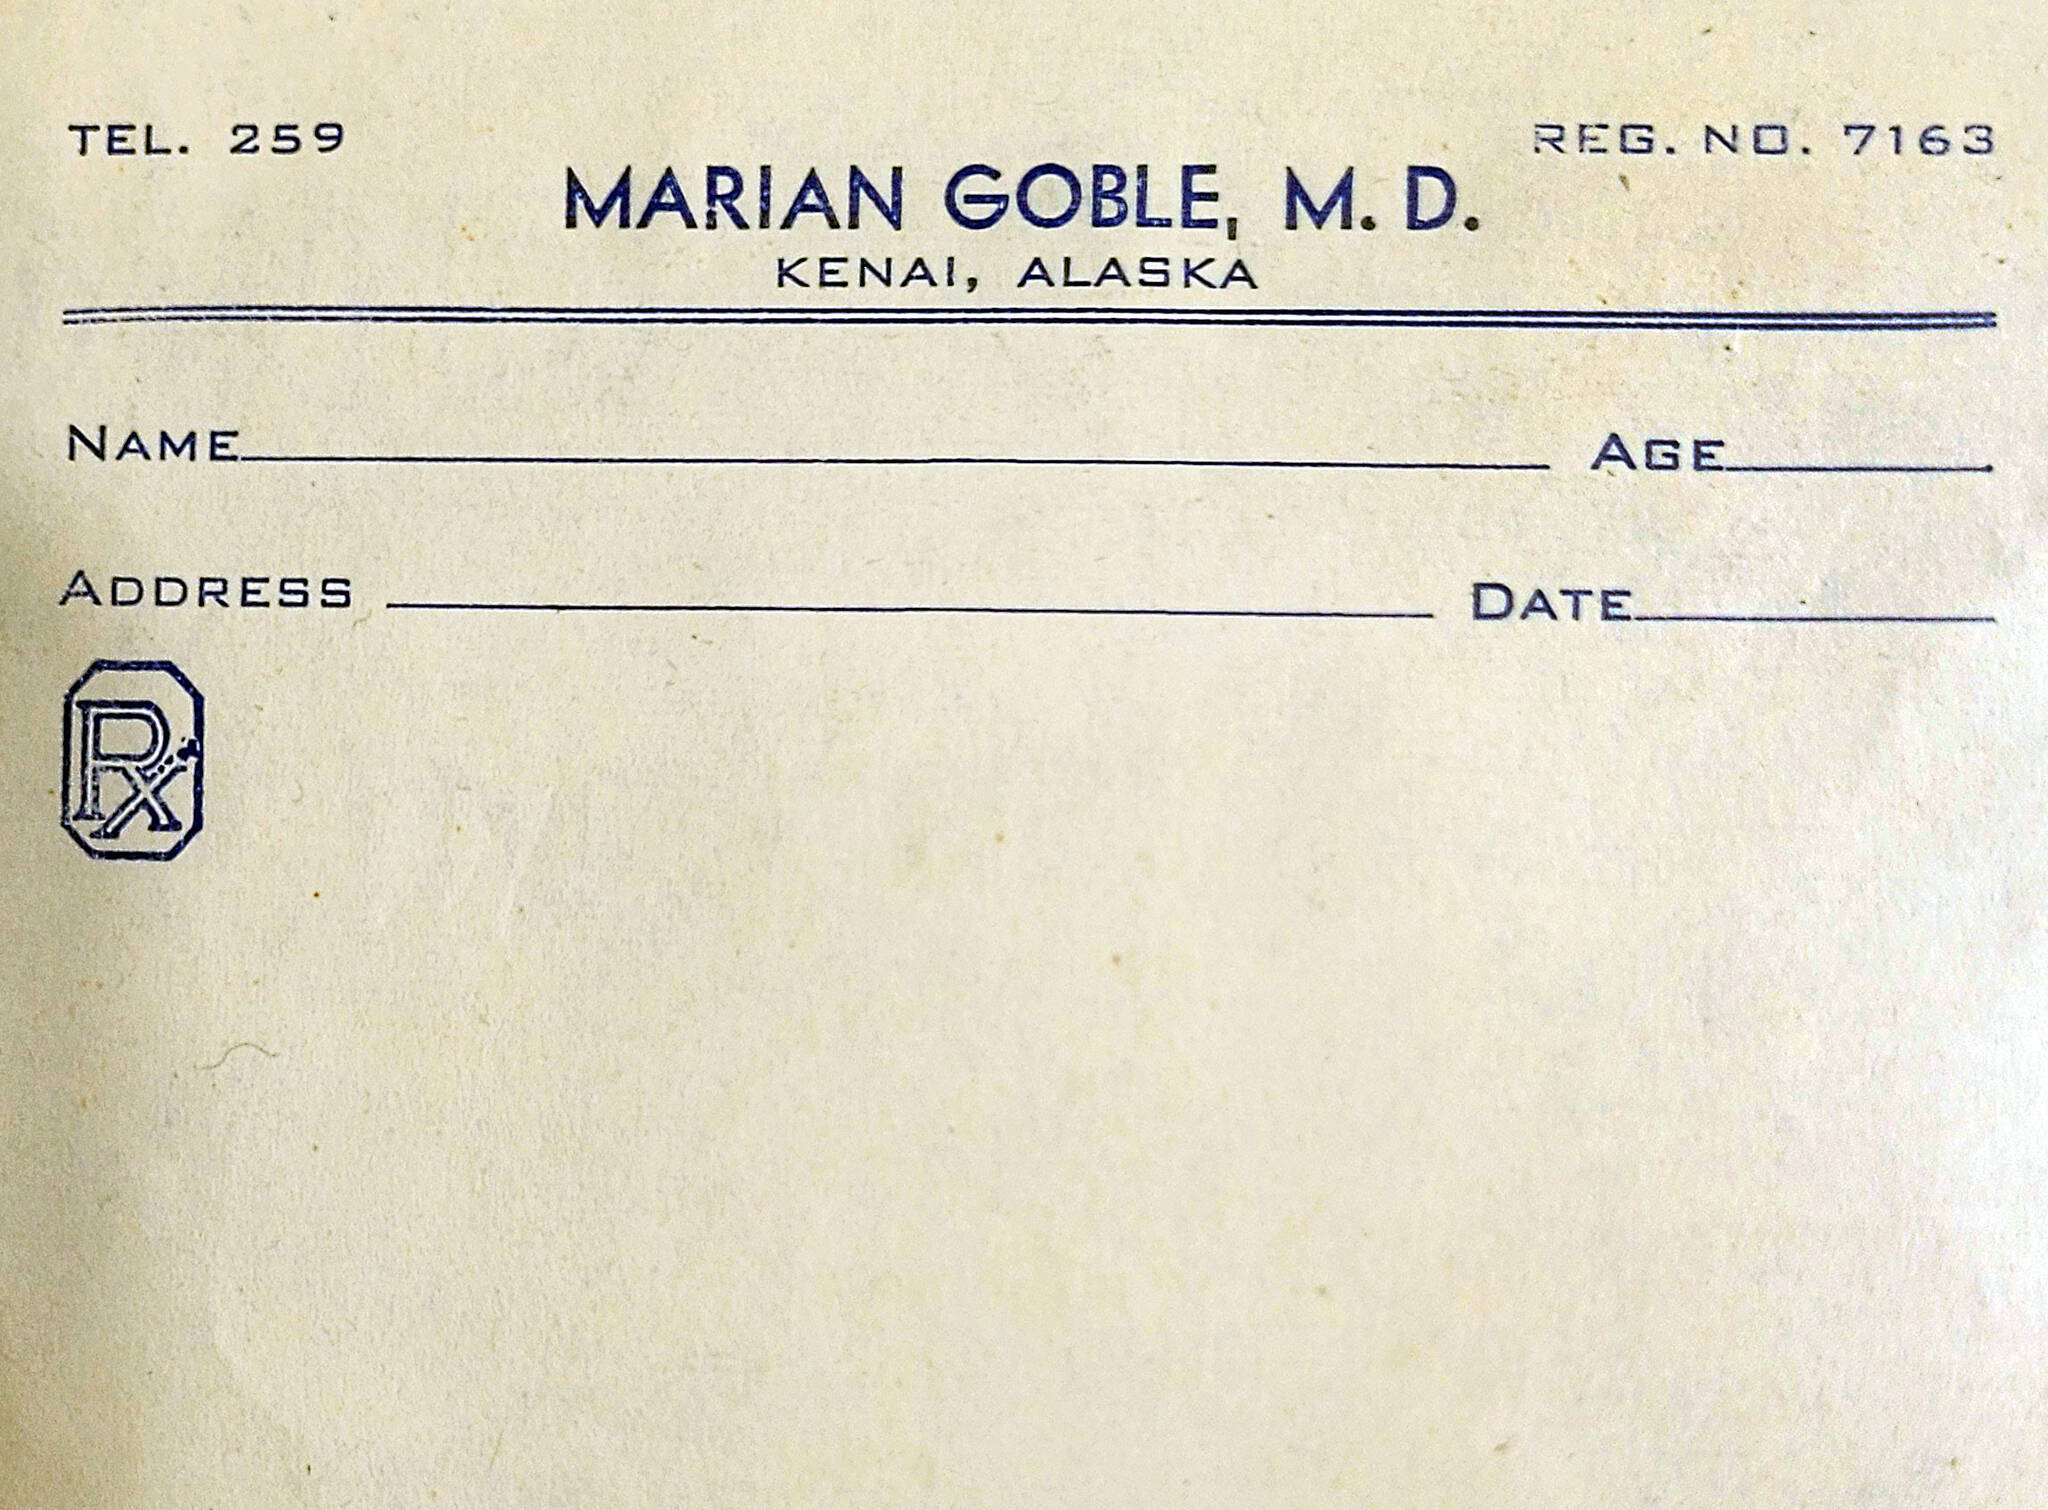 Detail from Dr. Goble’s prescription pad from her Kenai clinic. (Photo courtesy of Ben and Marian Goble)